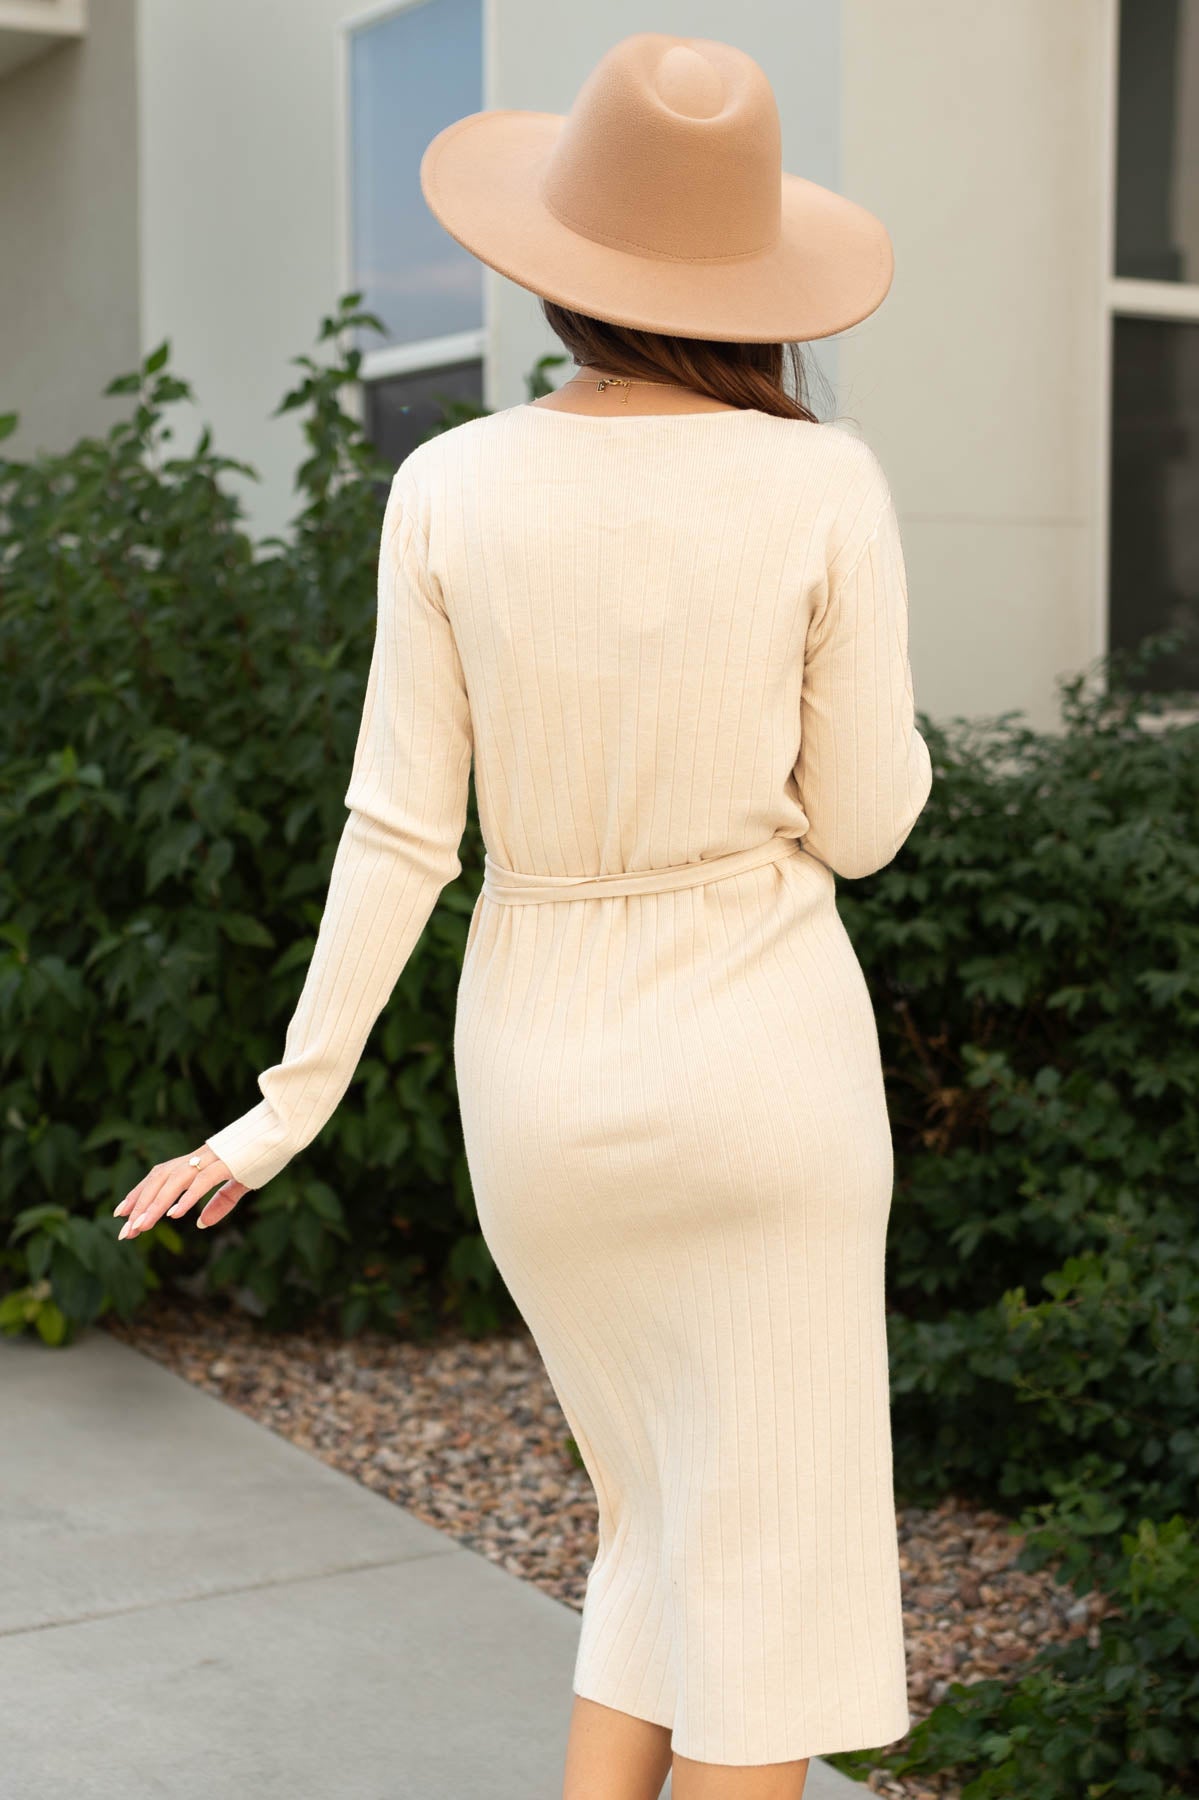 Back view of an oatmeal dress